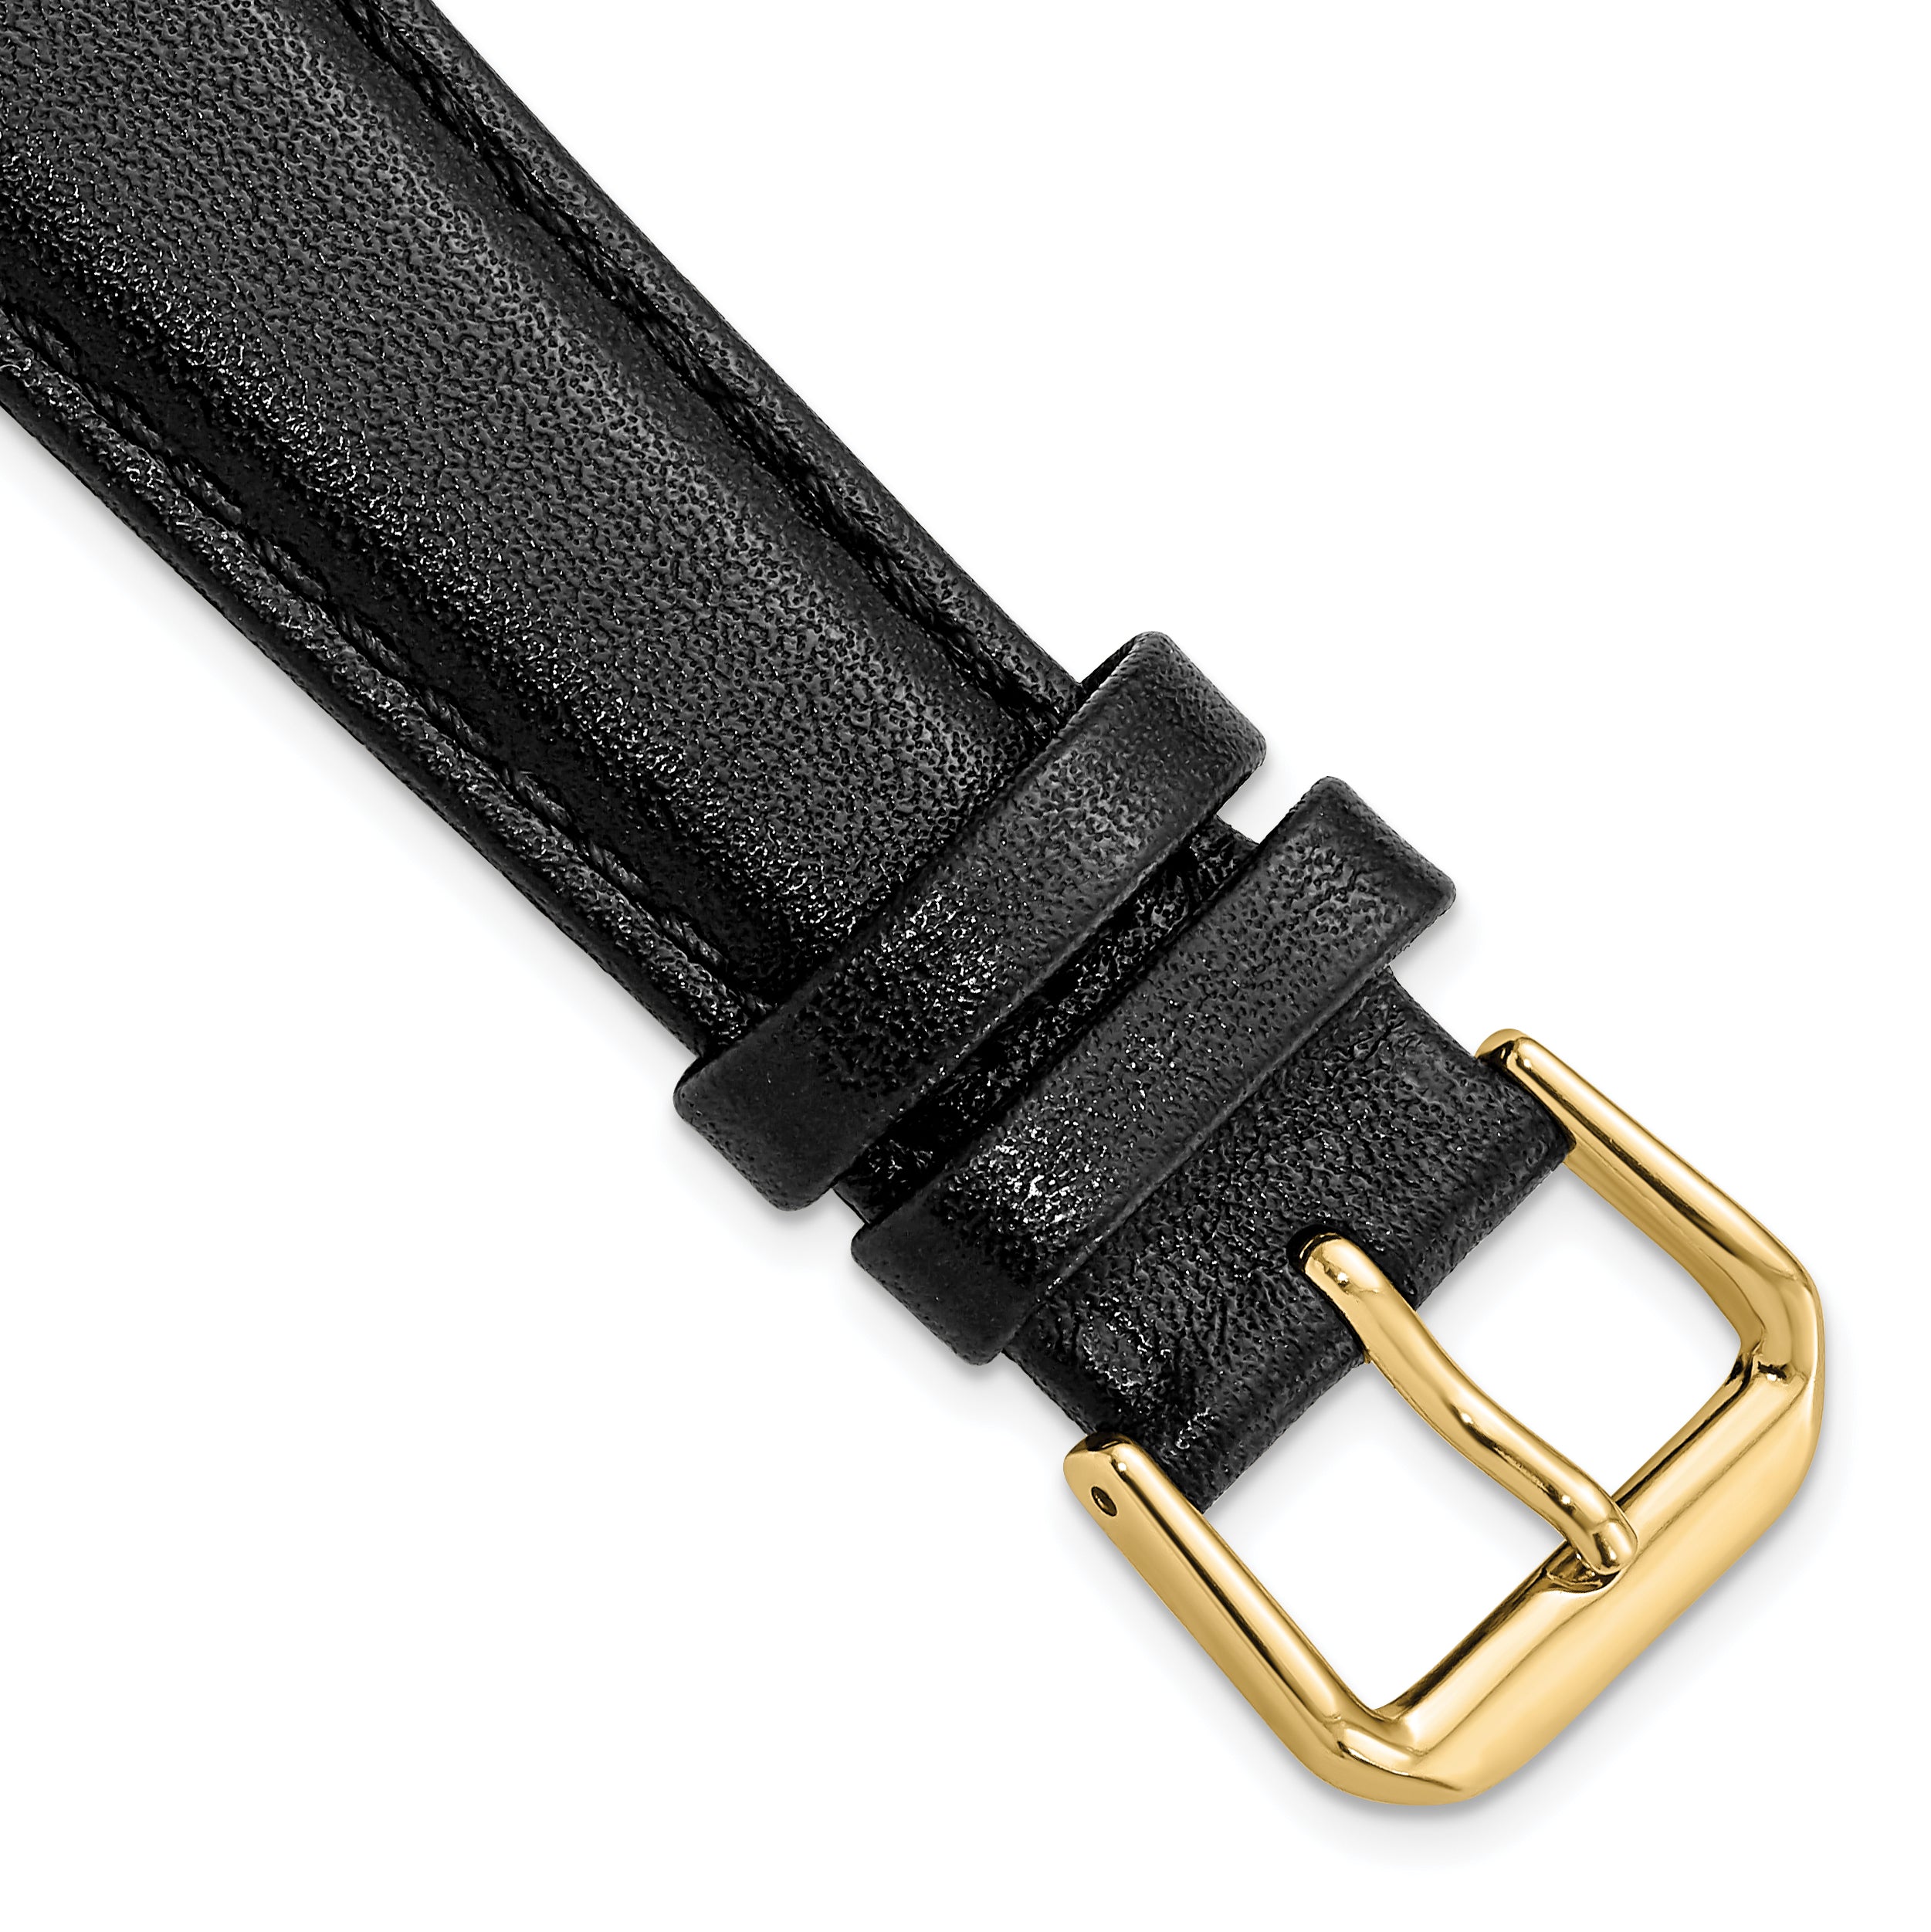 DeBeer 19mm Short Black Smooth Leather with Gold-tone Buckle 6.75 inch Watch Band